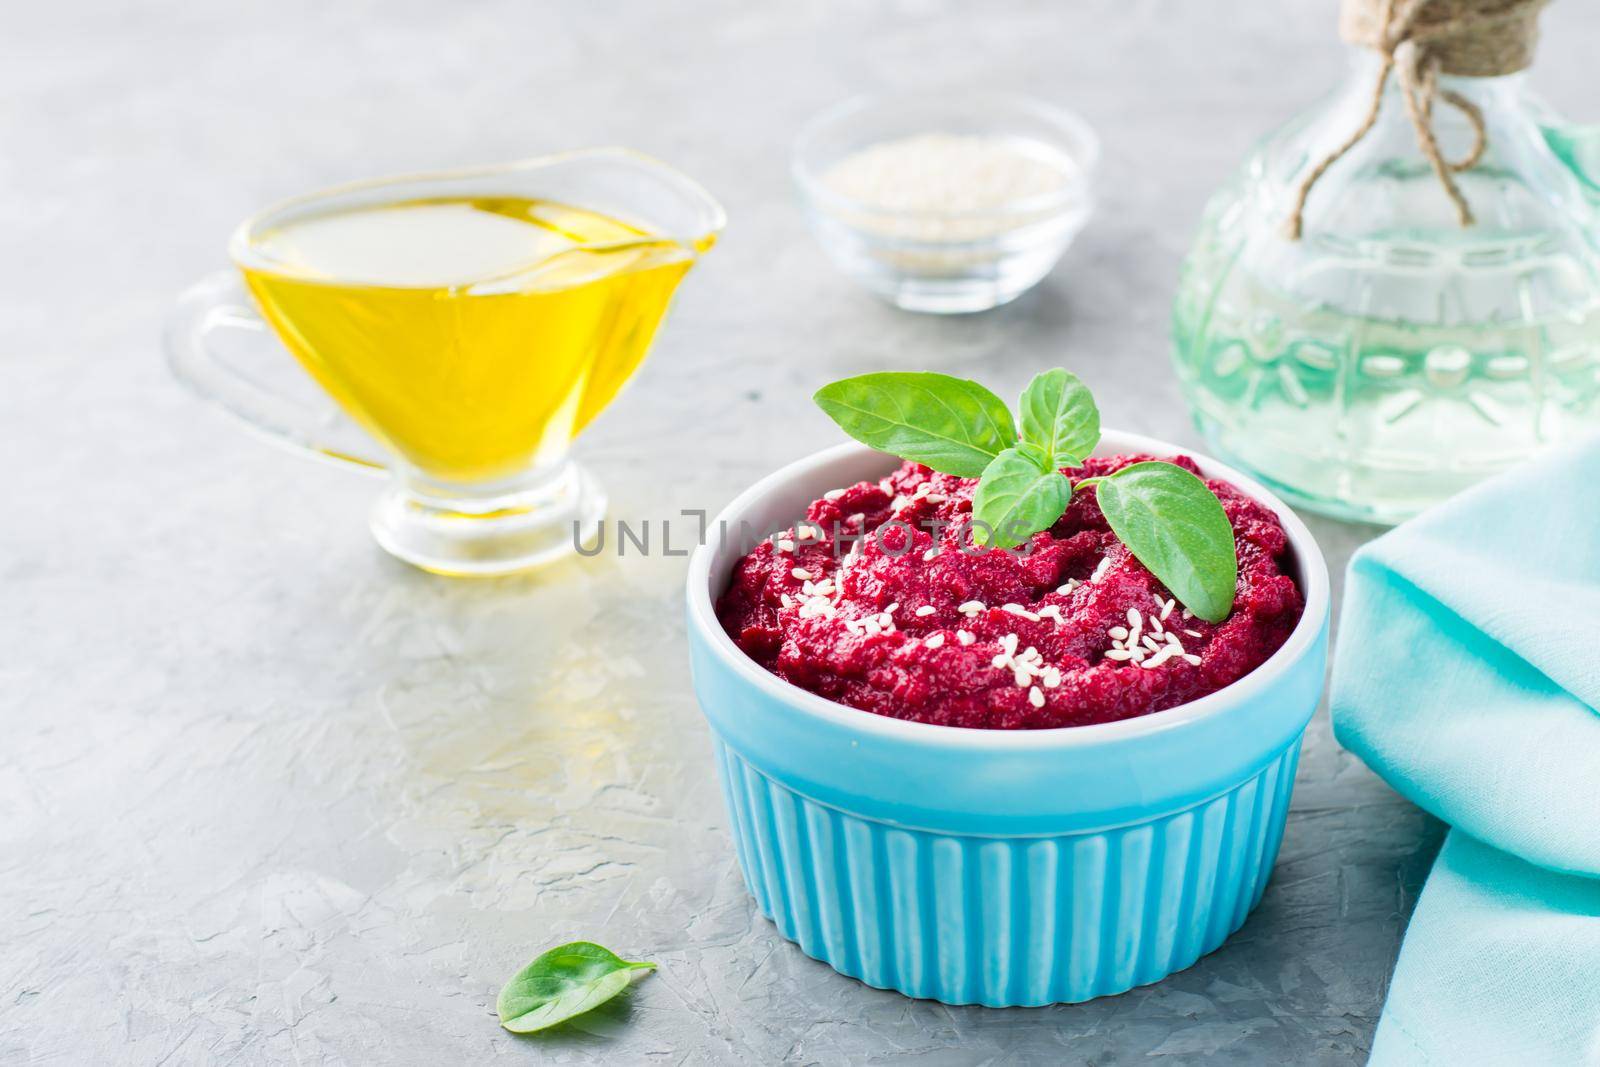 Baked beet hummus in a bowl with sesame seeds and basil on the table. Close-up